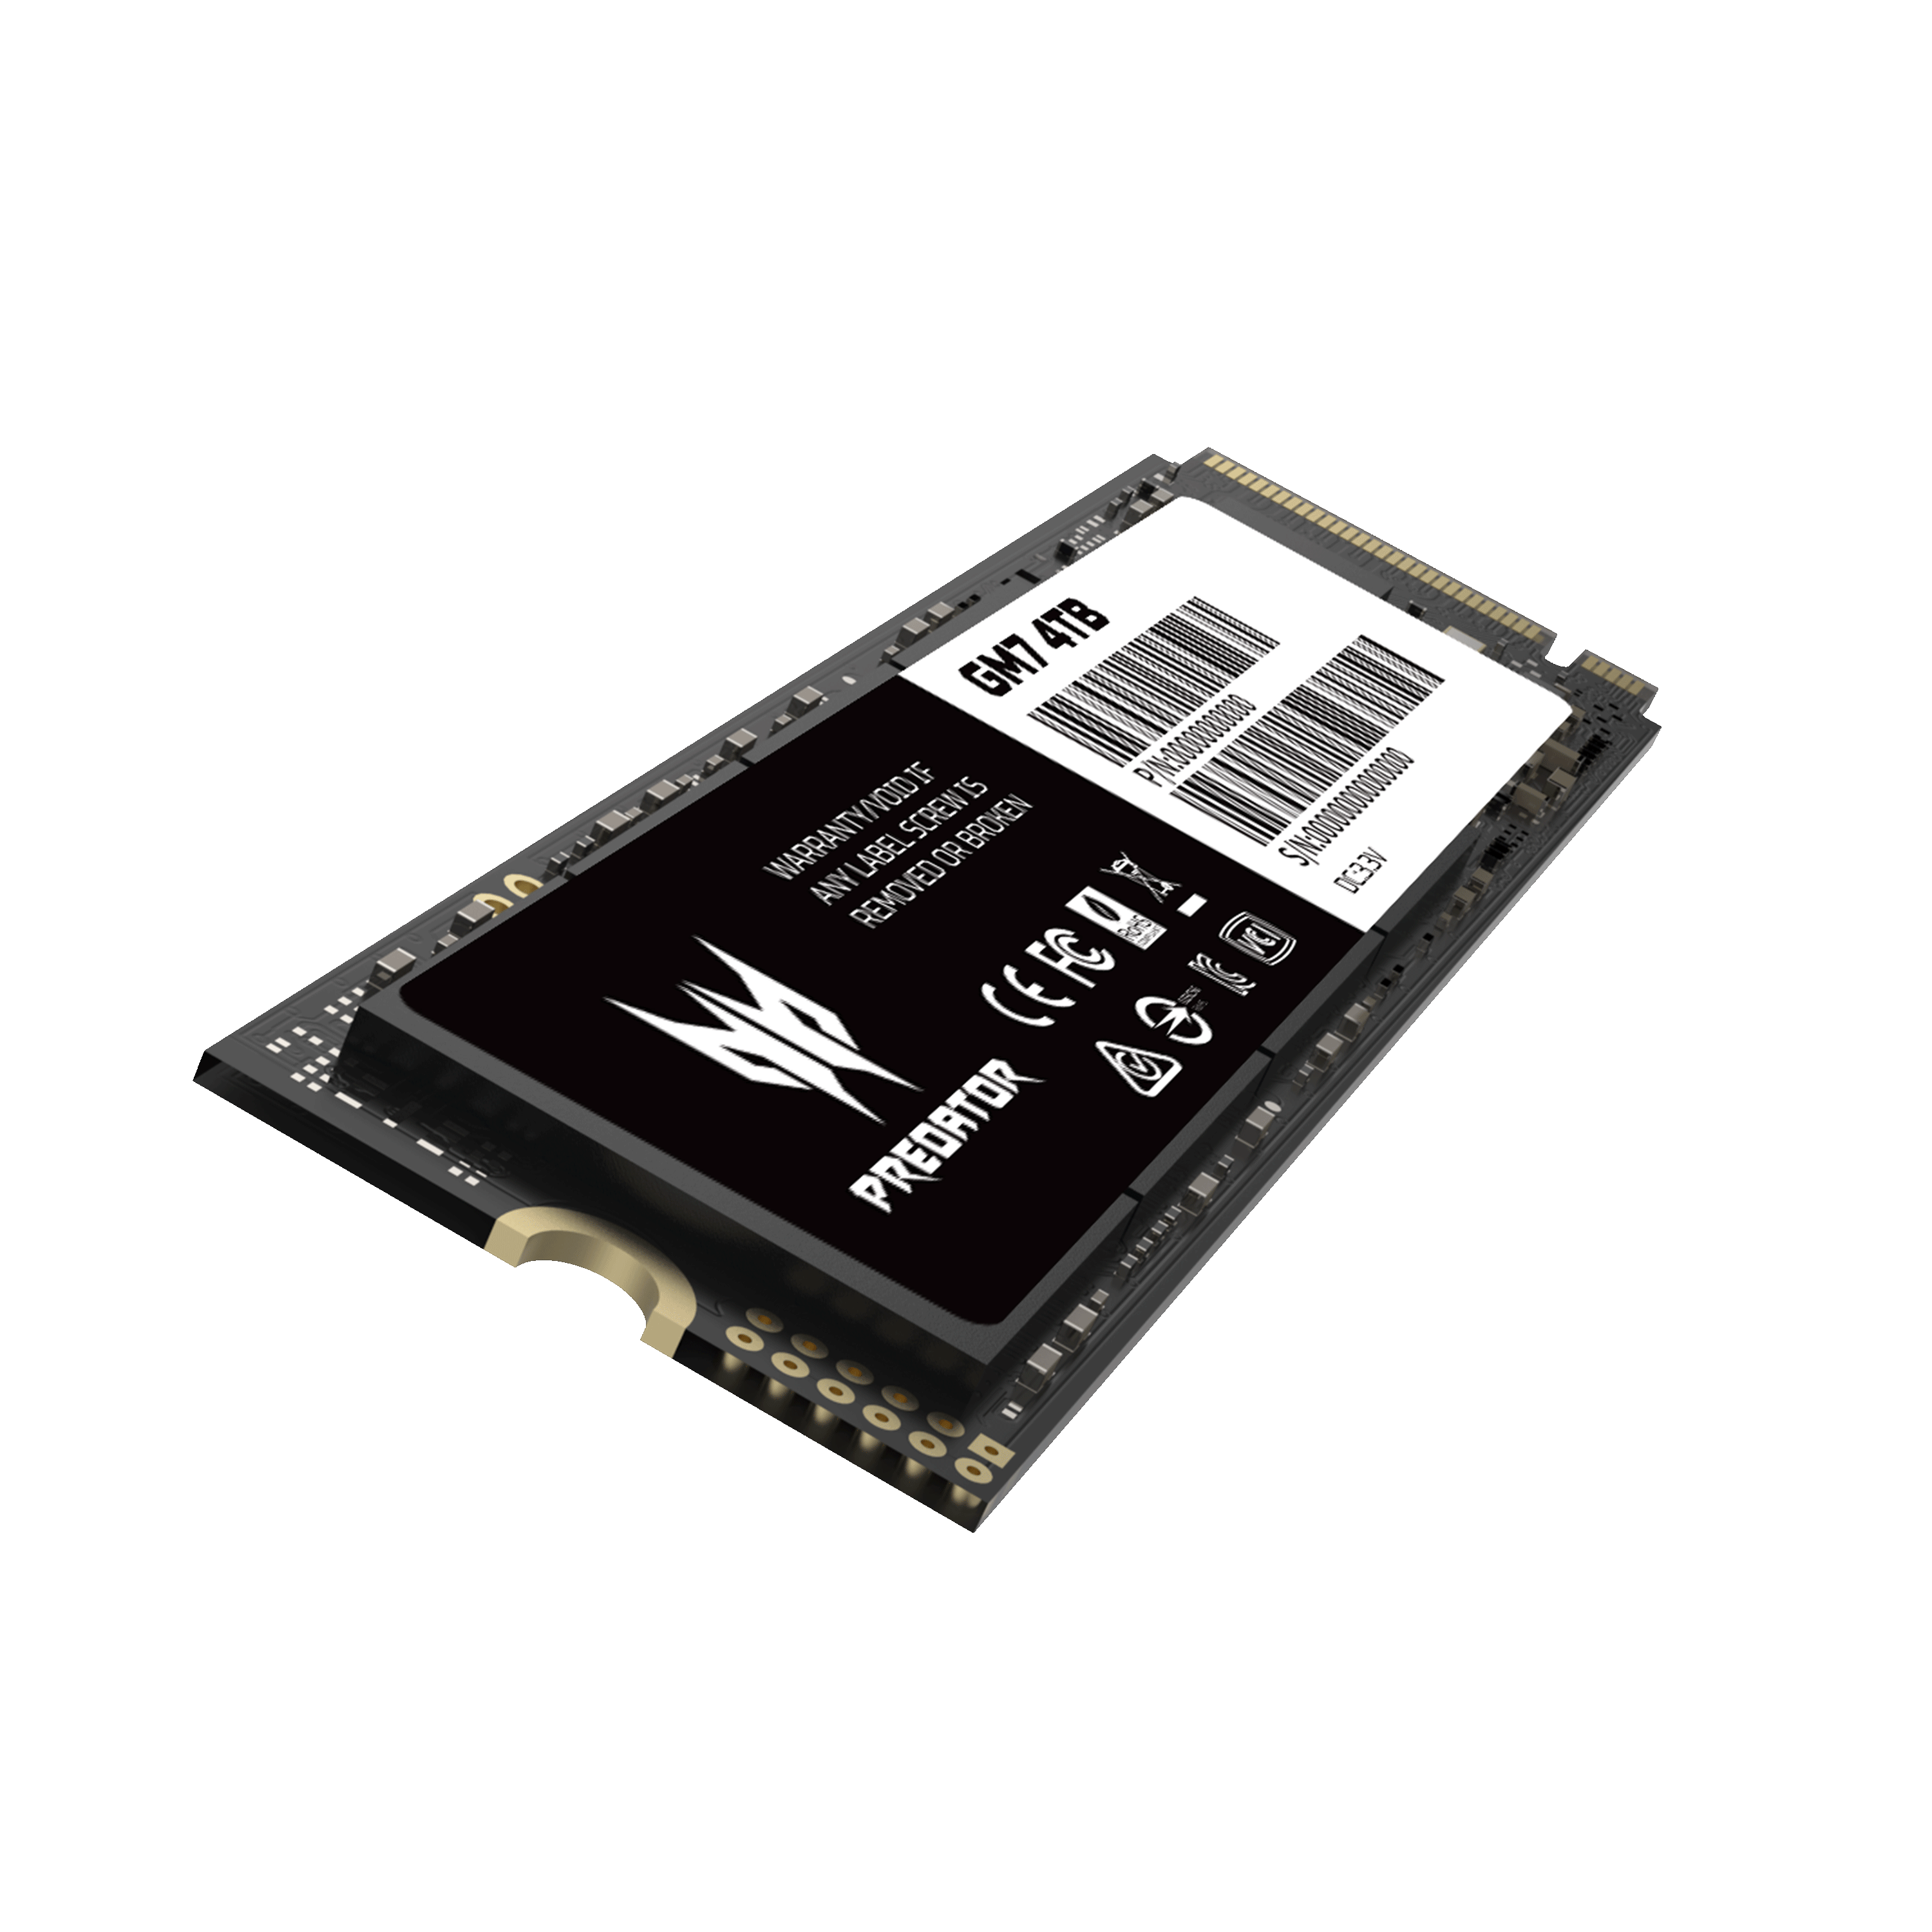 acer Predator GM7000 2TB NVMe Gen4 Gaming SSD, M.2 2280, Compatible with  PS5, PCIe 4.0 Internal PC Solid State Hard Drive Up to 7400MB/s 